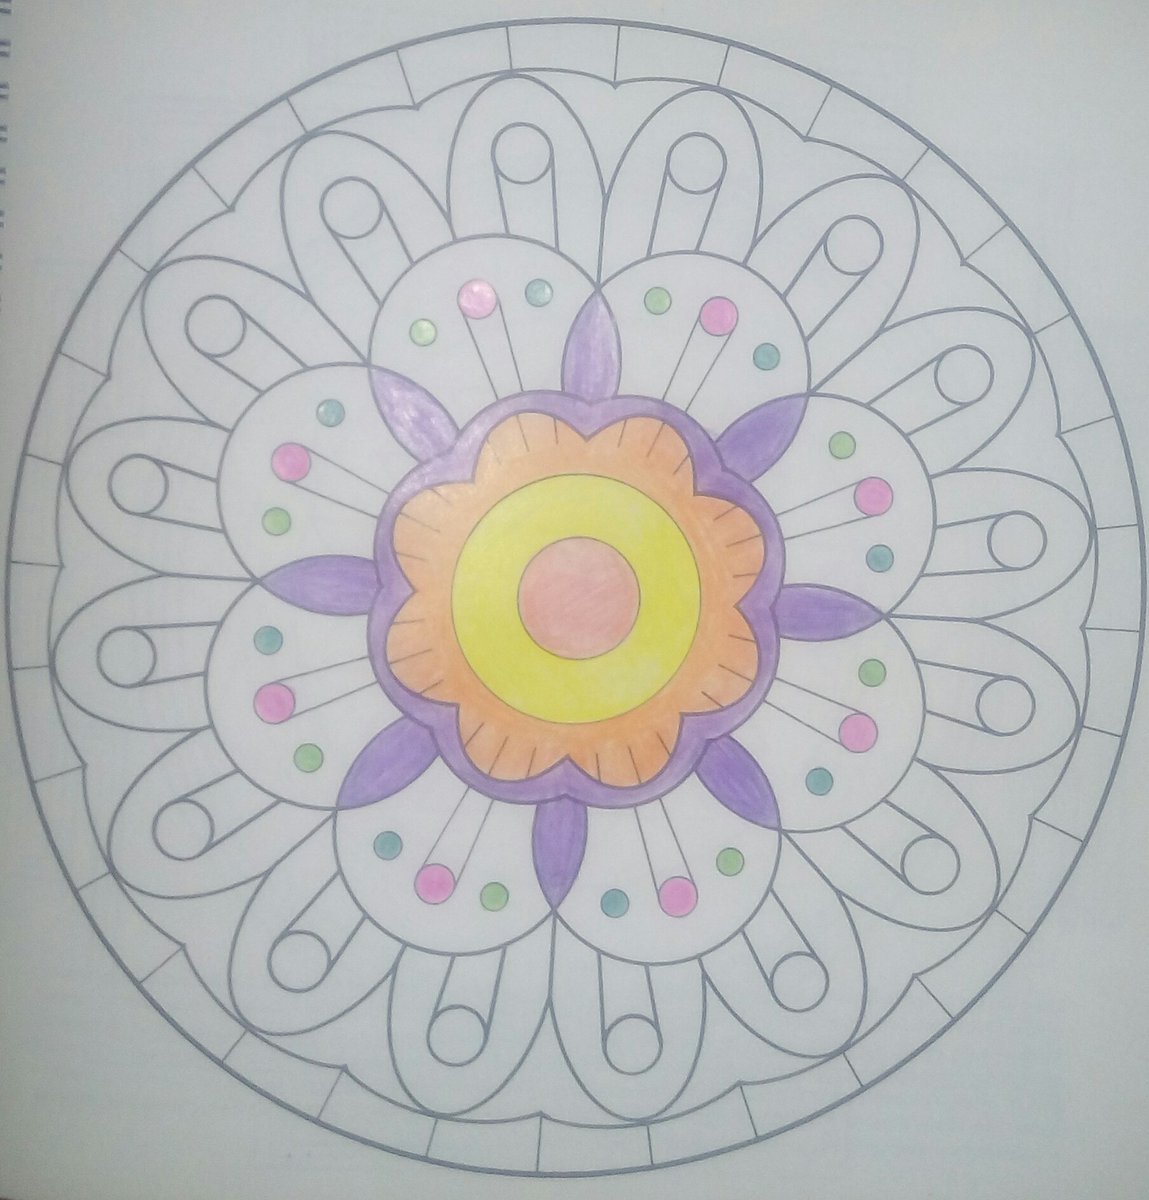 Coloring mandalas is a great way to ease stress. You can finish in one seating or complete over time. You can even color multiples! Color w/someone, in silence or while chatting; there are no rules.Search "mandalas" online for free, printable pages #CoronaCareKE  #CoronaCare